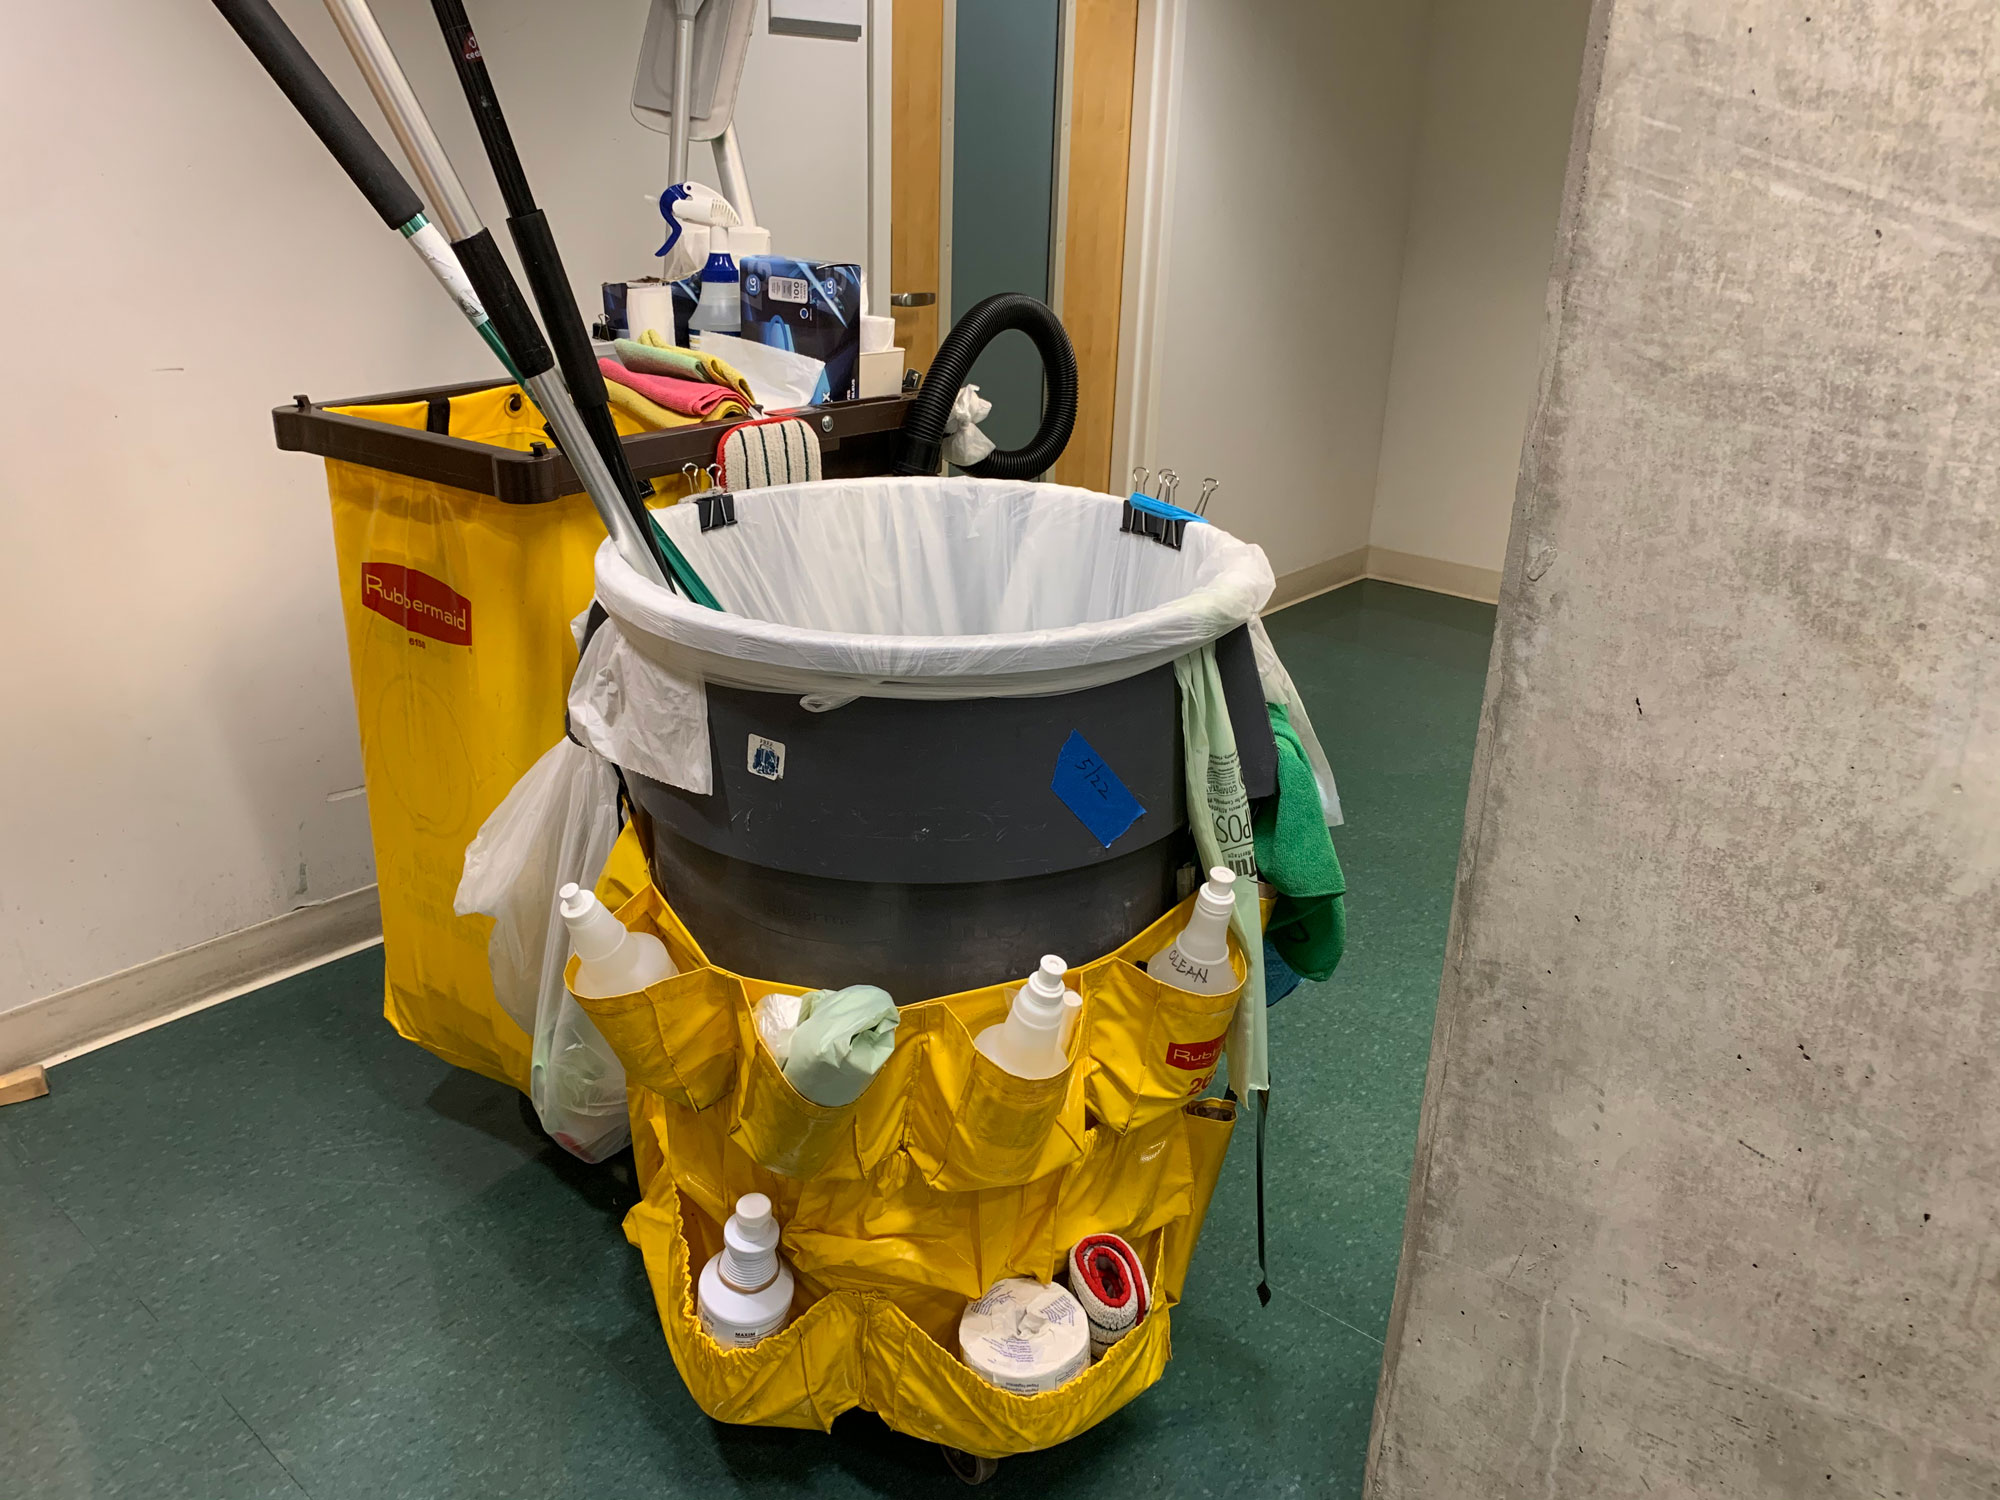 A trash can with a cleaning supplies cart in an office hallway.